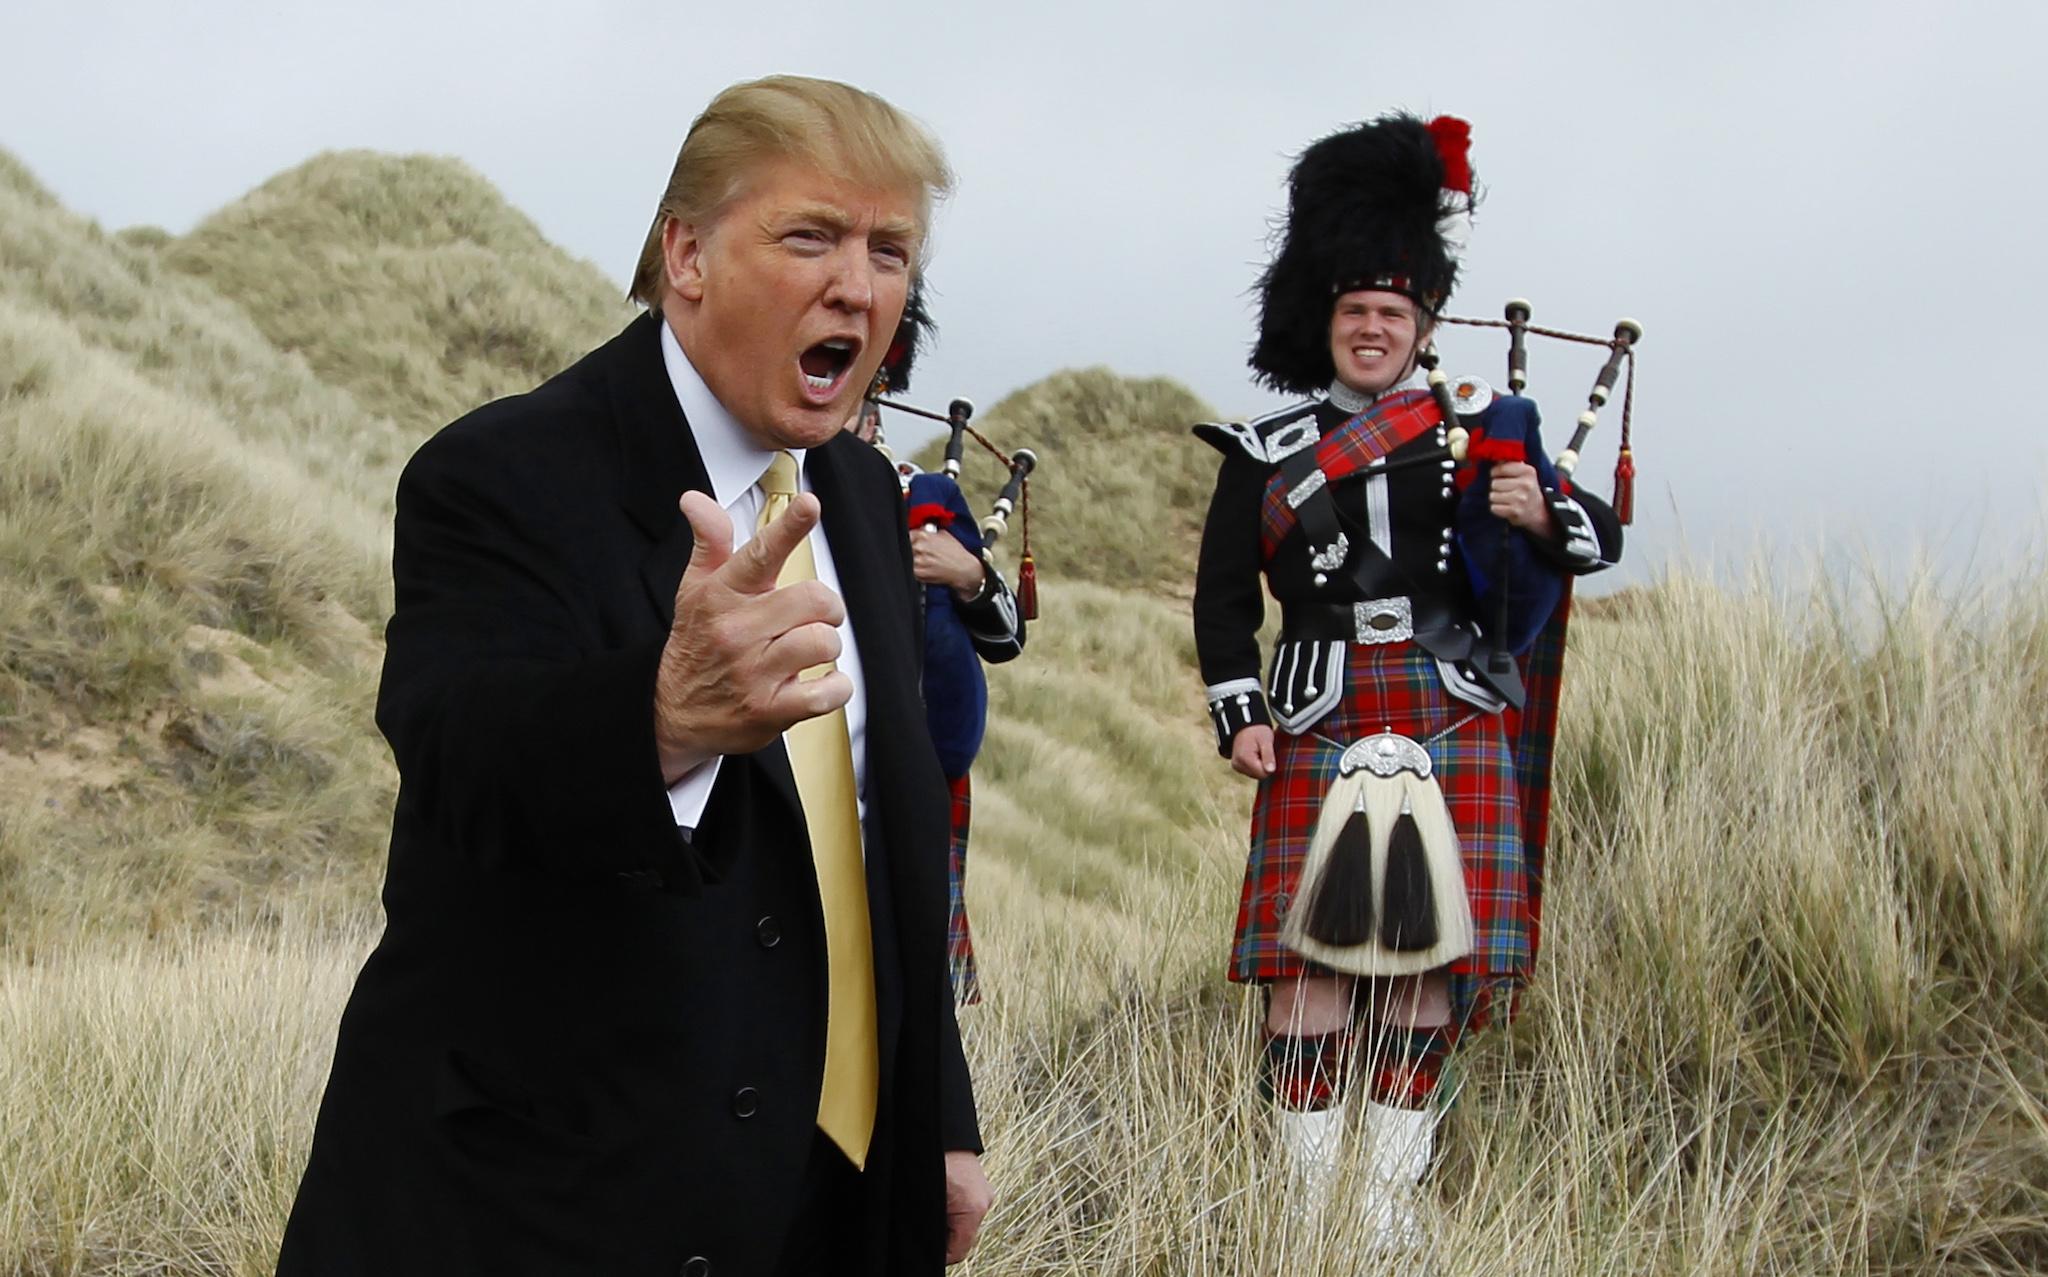 U.S. property mogul Donald Trump gestures during a media event on the sand dunes of the Menie estate, the site for Trump's proposed golf resort, near Aberdeen, north east Scotland May 27, 2010